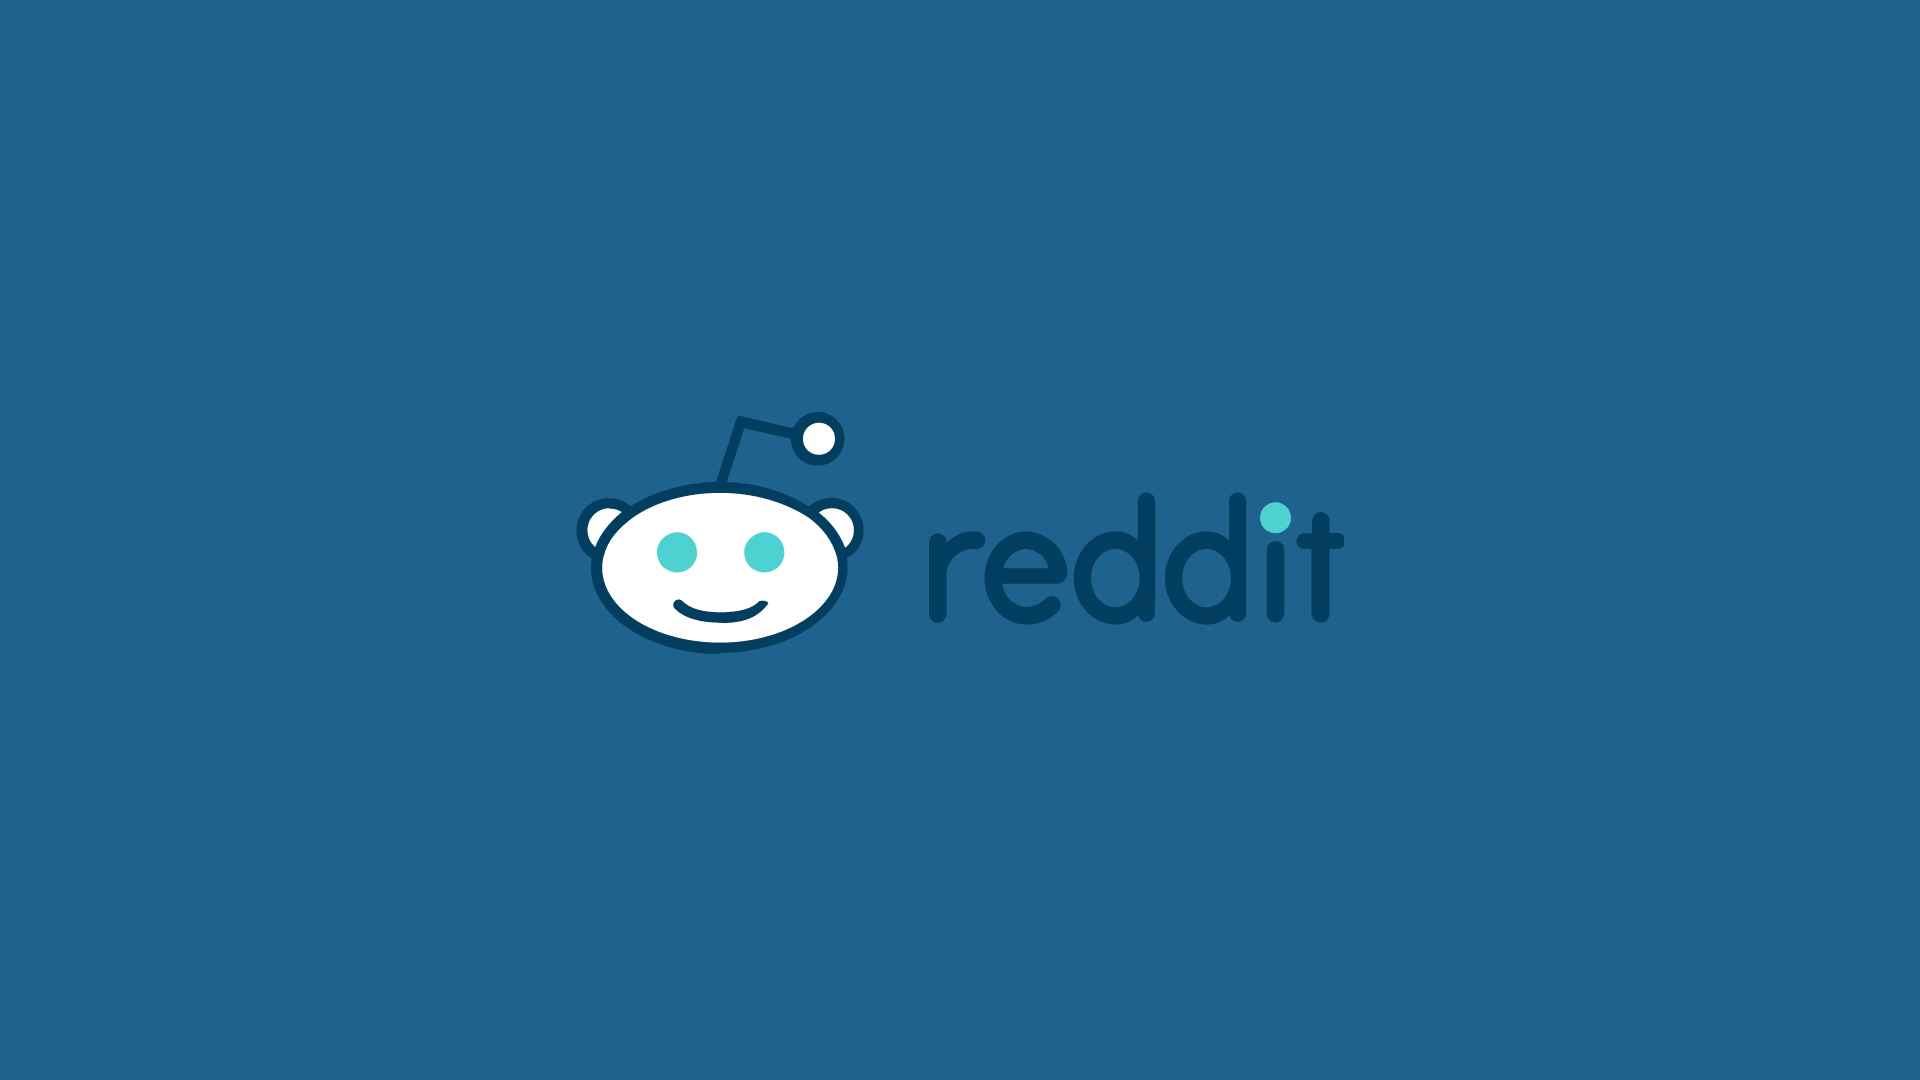 Can users share images, videos, or other multimedia content on Reddit?